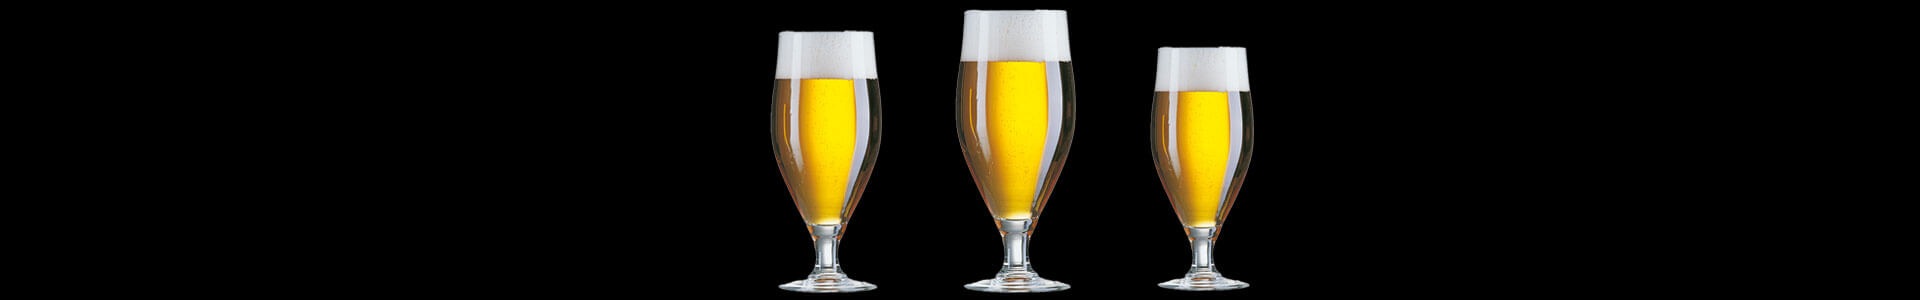 Beer glasses from the Cervoise series by Arcoroc in several sizes.